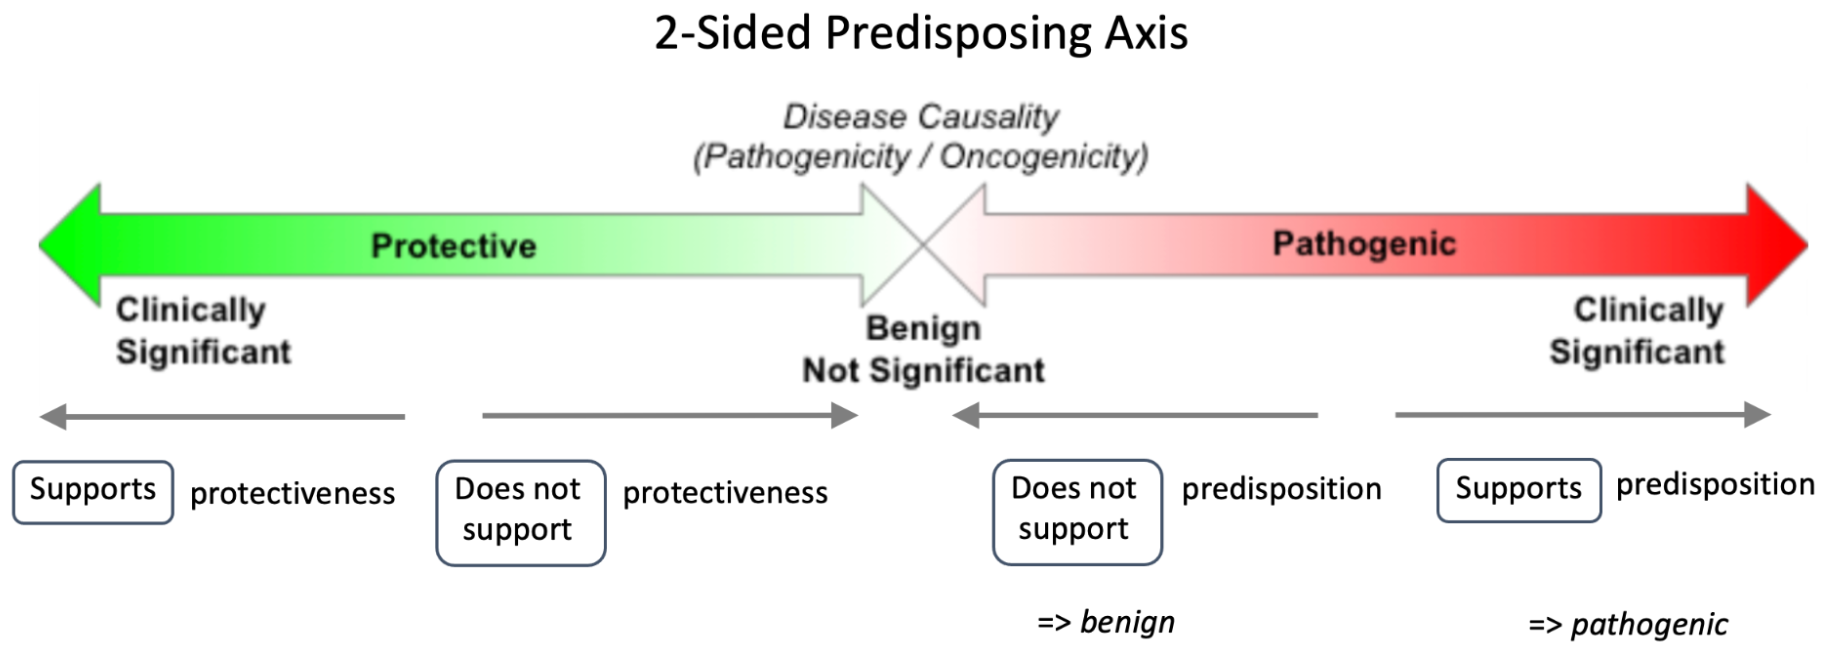 Predisposing Evidence Item Clinical Significance relates either to cancer protectiveness or predisposition